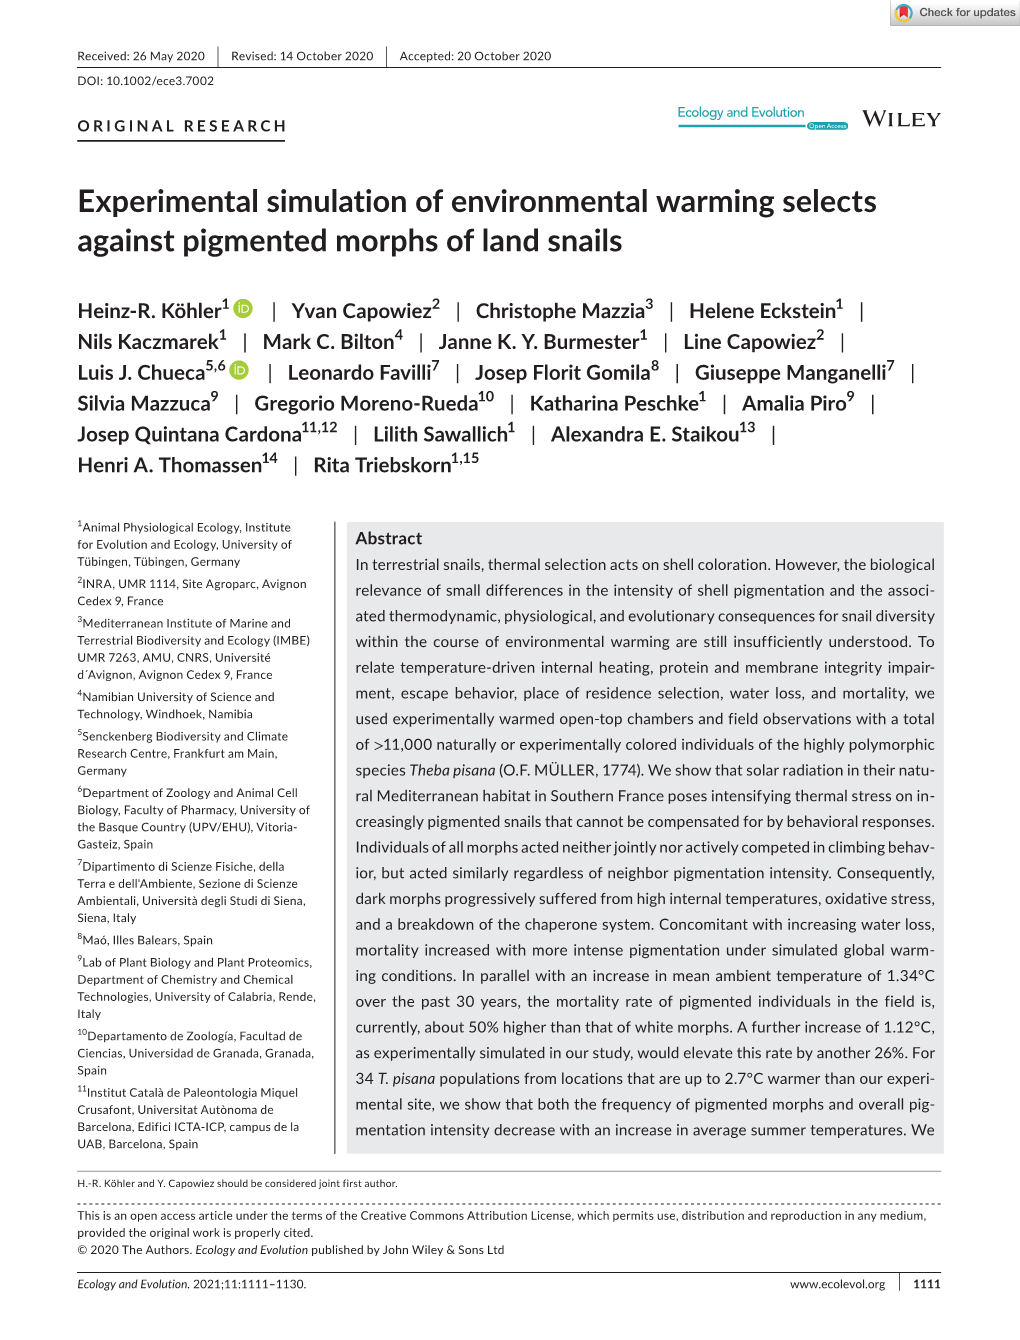 Experimental Simulation of Environmental Warming Selects Against Pigmented Morphs of Land Snails